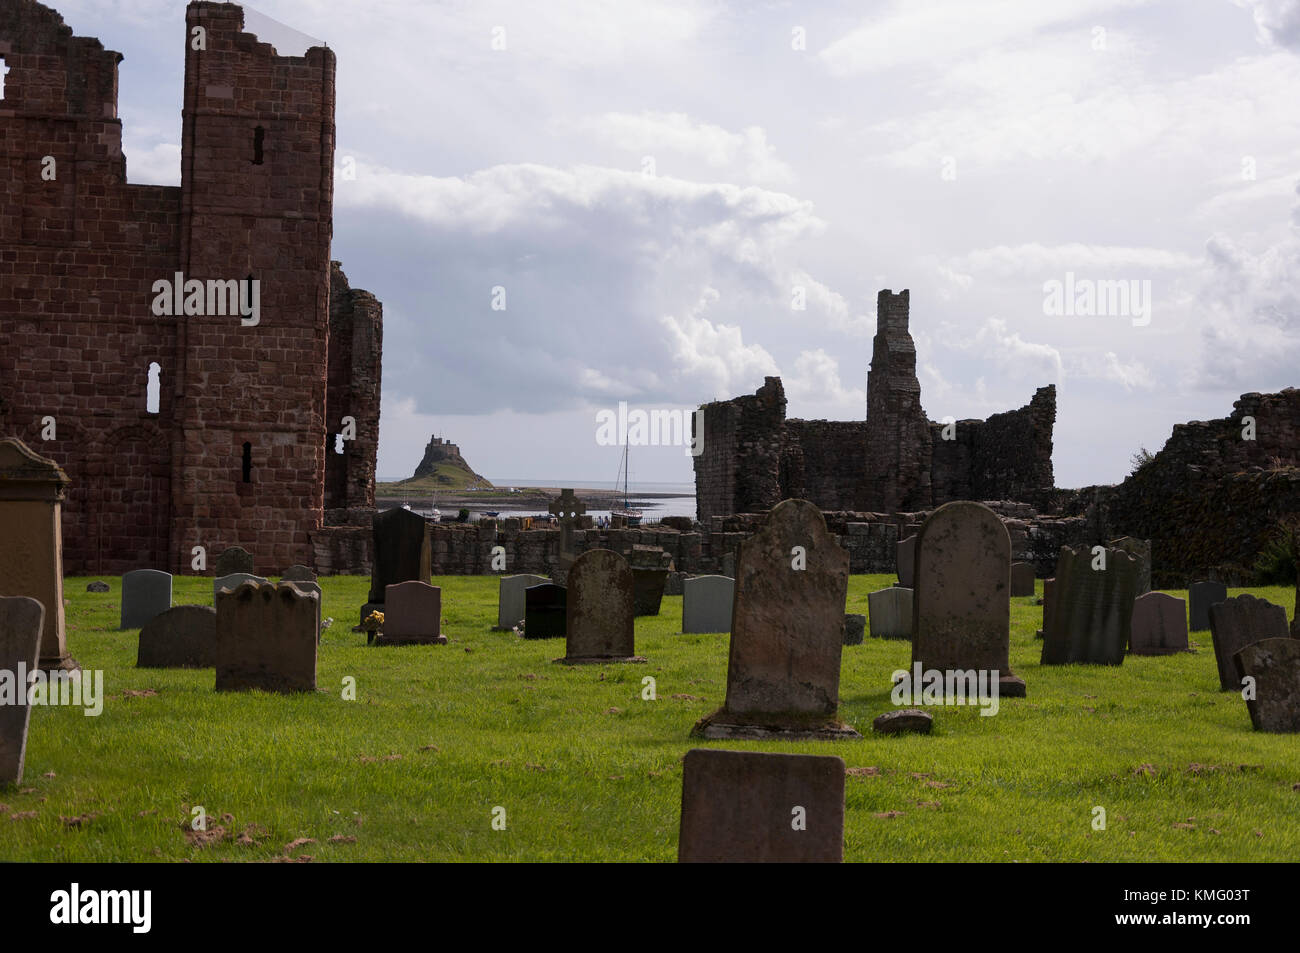 Looking to Lindisfarne castle from Lindisfarne priory, at Holy Island in Northumberland on the North East coast of England. Stock Photo